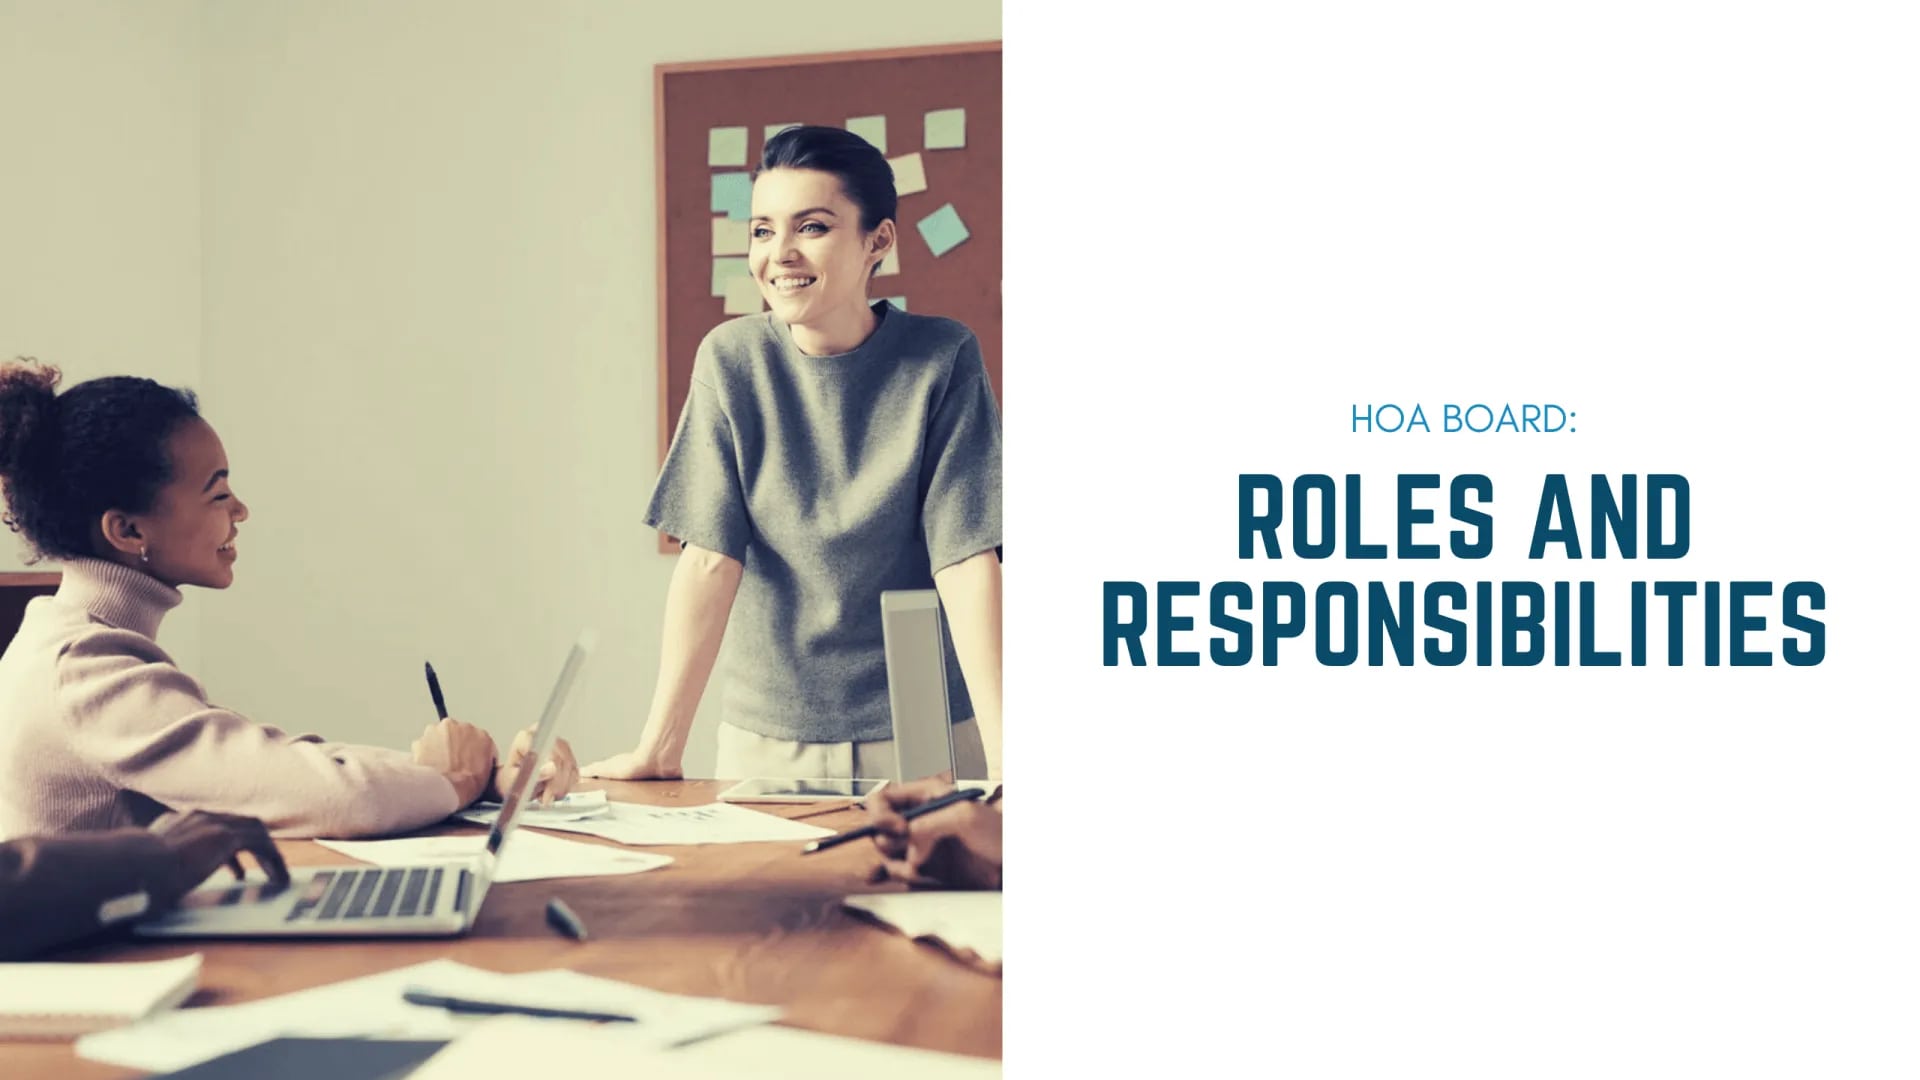 Roles and Responsibilities of a Boise HOA Board